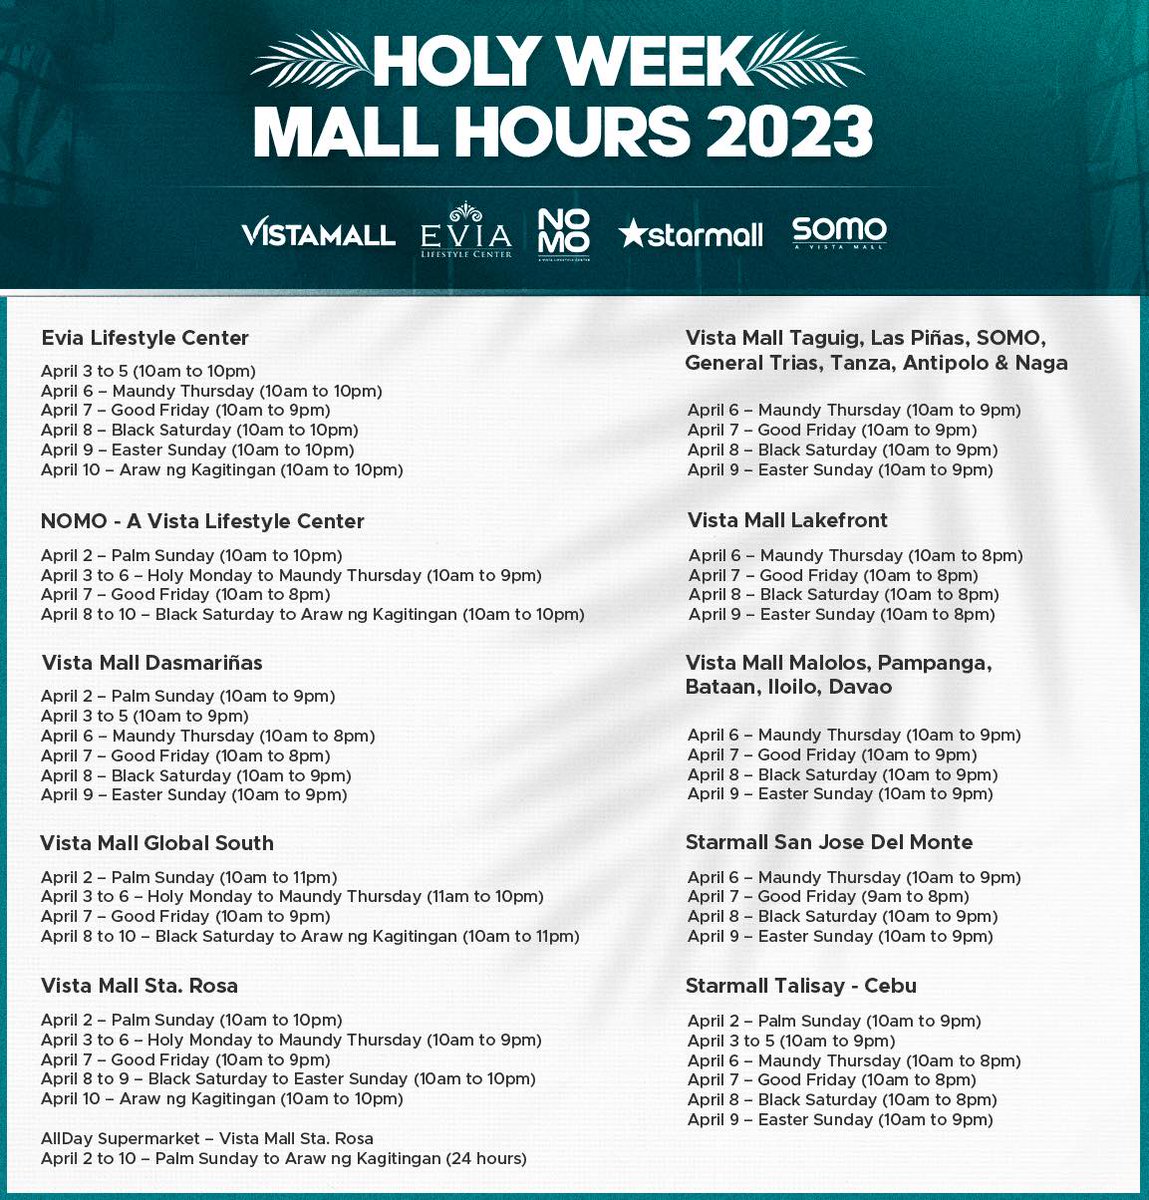 Plan your Holy Week mall trips ahead! Check out the 2023 operating hours of Vista Mall, Starmall, and Lifestyle Centers, from Palm Sunday to Araw ng Kagitingan.